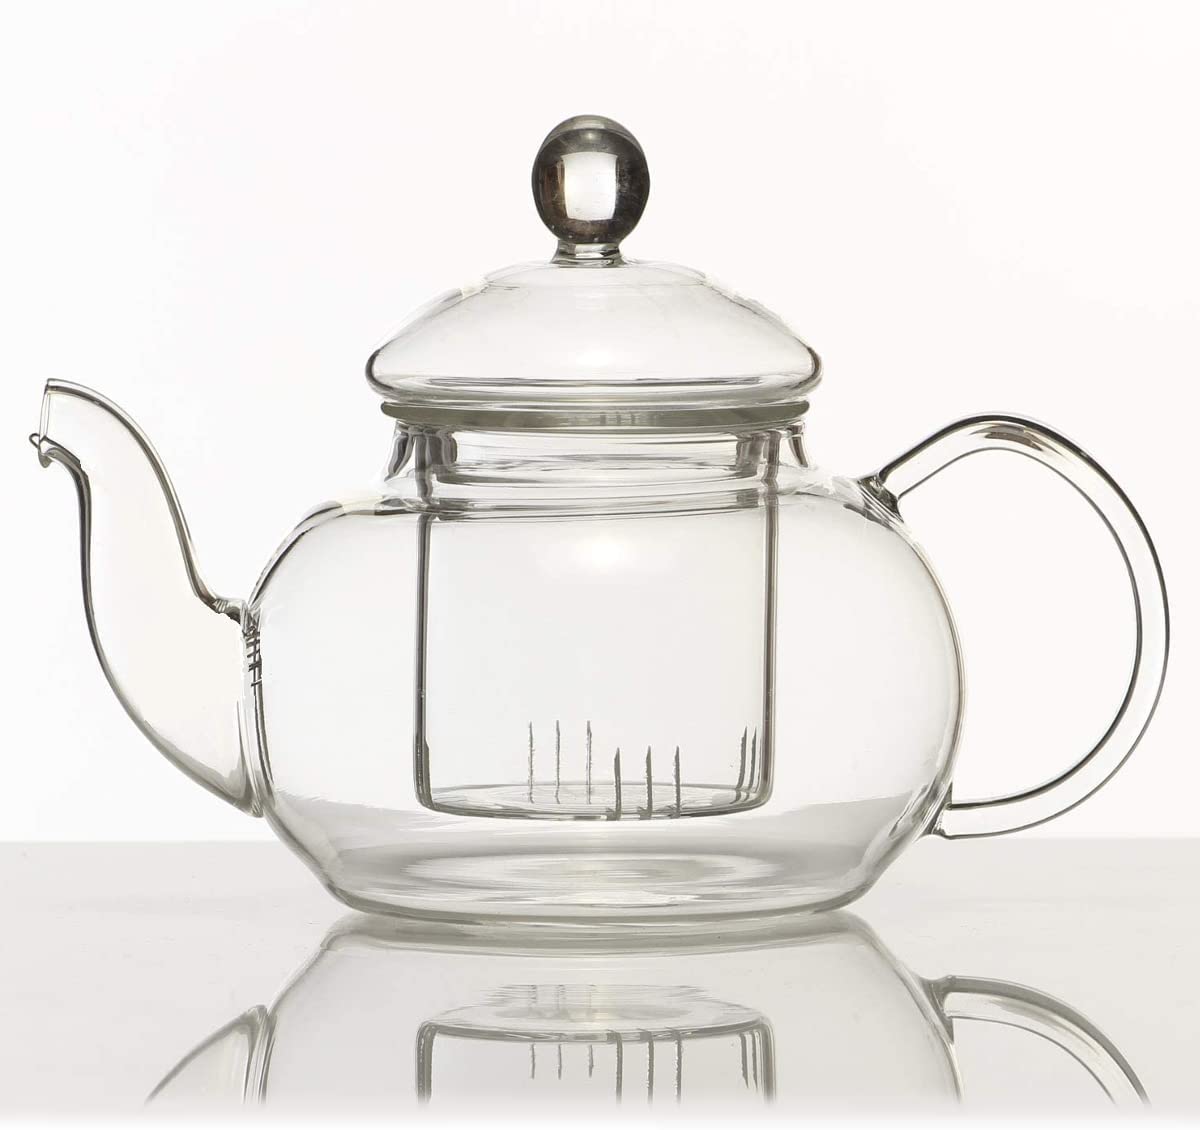 Dimono Hand Blown Teapot with Tea Filter & Tea Strainer Pot With Glass Filter Insert, 1500 ml